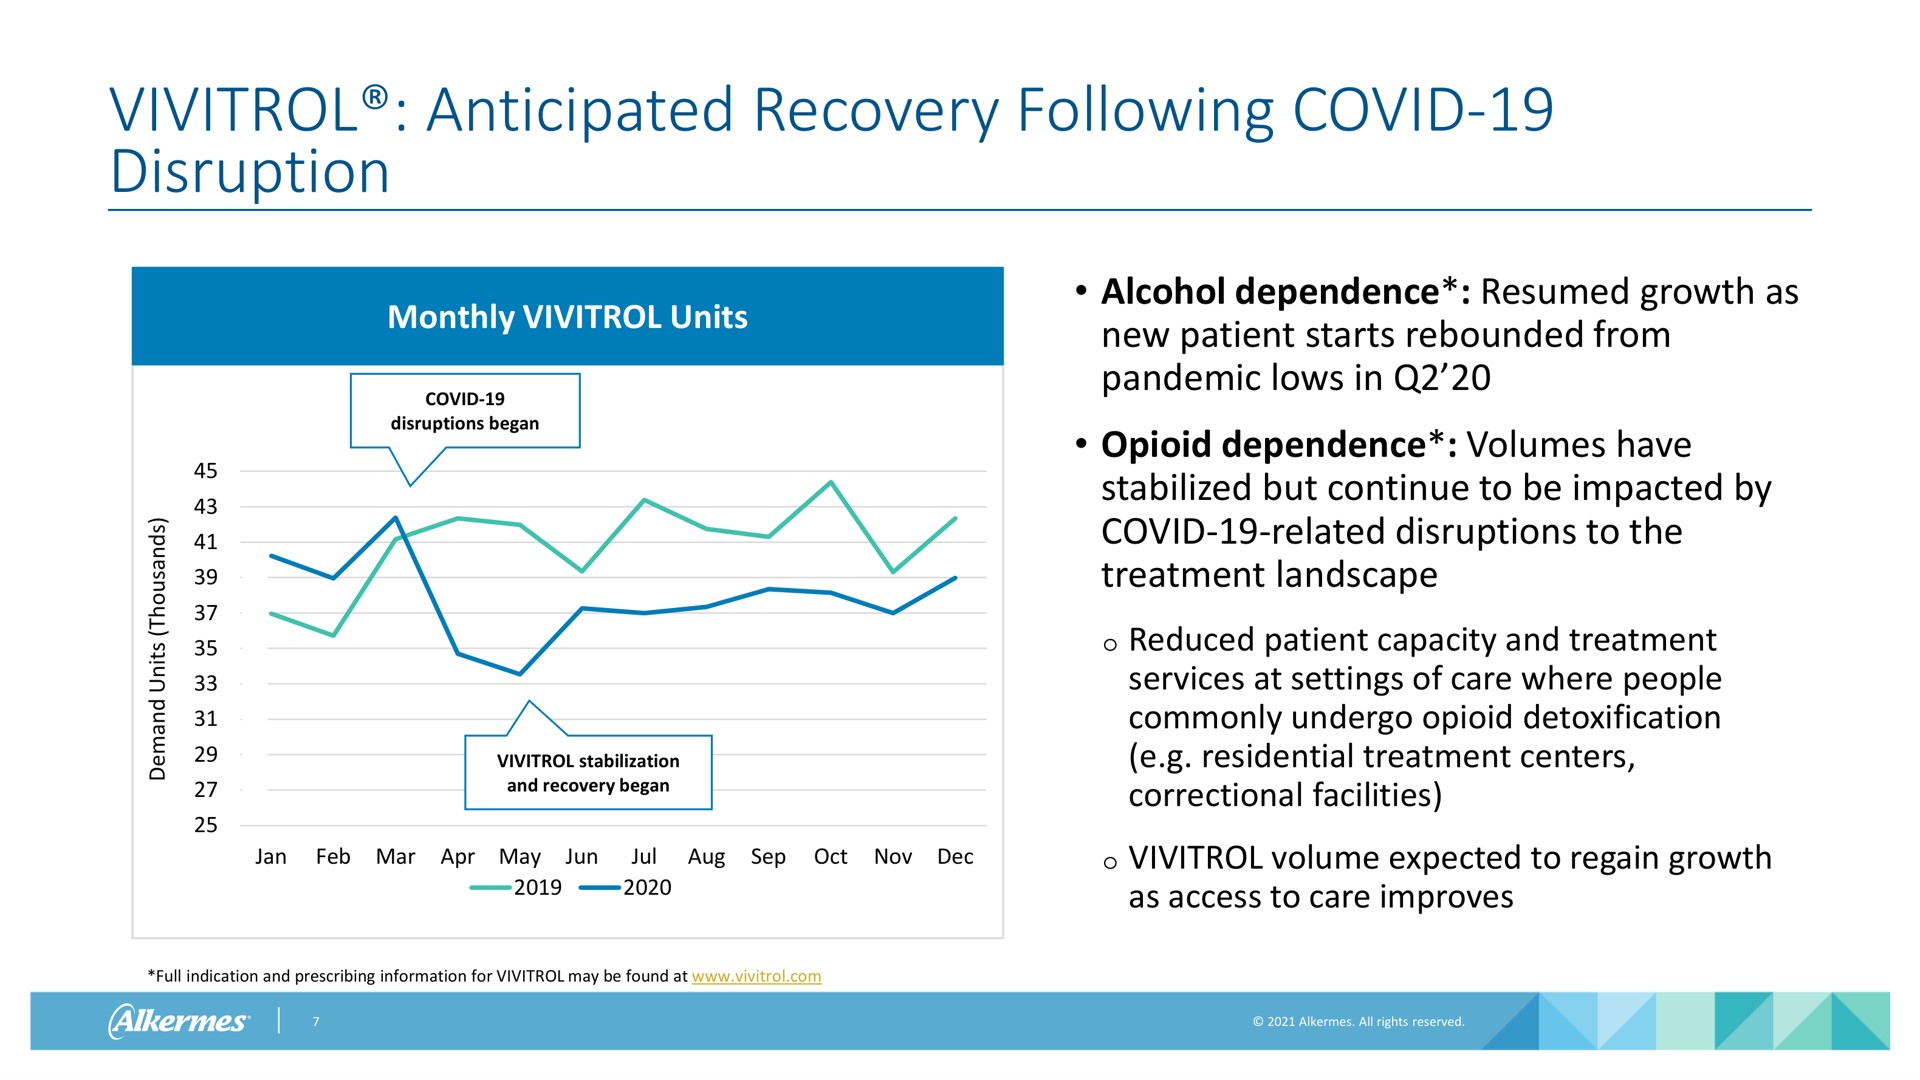 anticipated recovery following covid disruption monthly units covid disruptions began stabilization and recovery began alcohol dependence resumed growth as new patient starts rebounded from pandemic lows in dependence volumes have stabilized but continue to be impacted by covid related disruptions to the treatment landscape reduced patient capacity and treatment services at settings of care where people commonly undergo detoxification residential treatment centers correctional facilities mar may volume expected to regain growth as access to care improves full indication and prescribing information for may be found at unit i | Alkermes